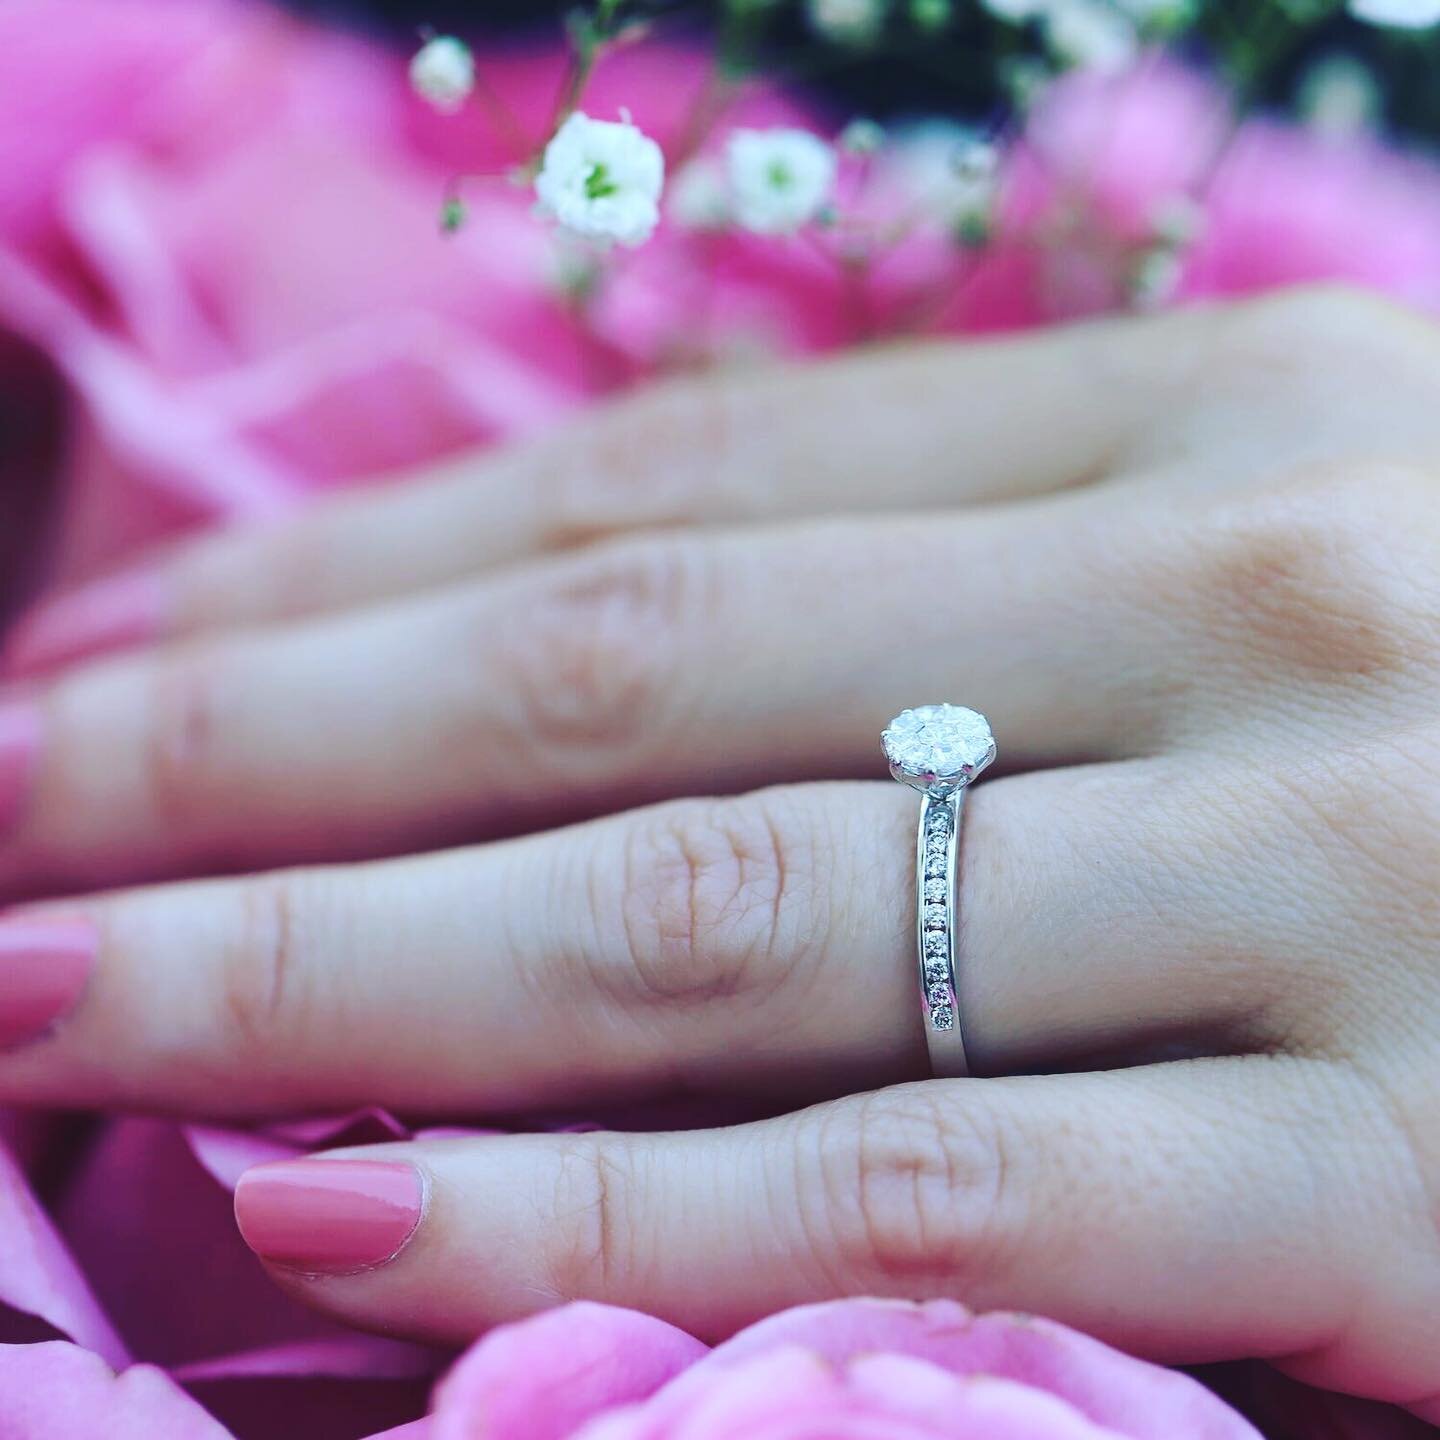 Will You Marry Me? 💕 By Provenance Gems Collection www.provenancegems.com #diamonds💎